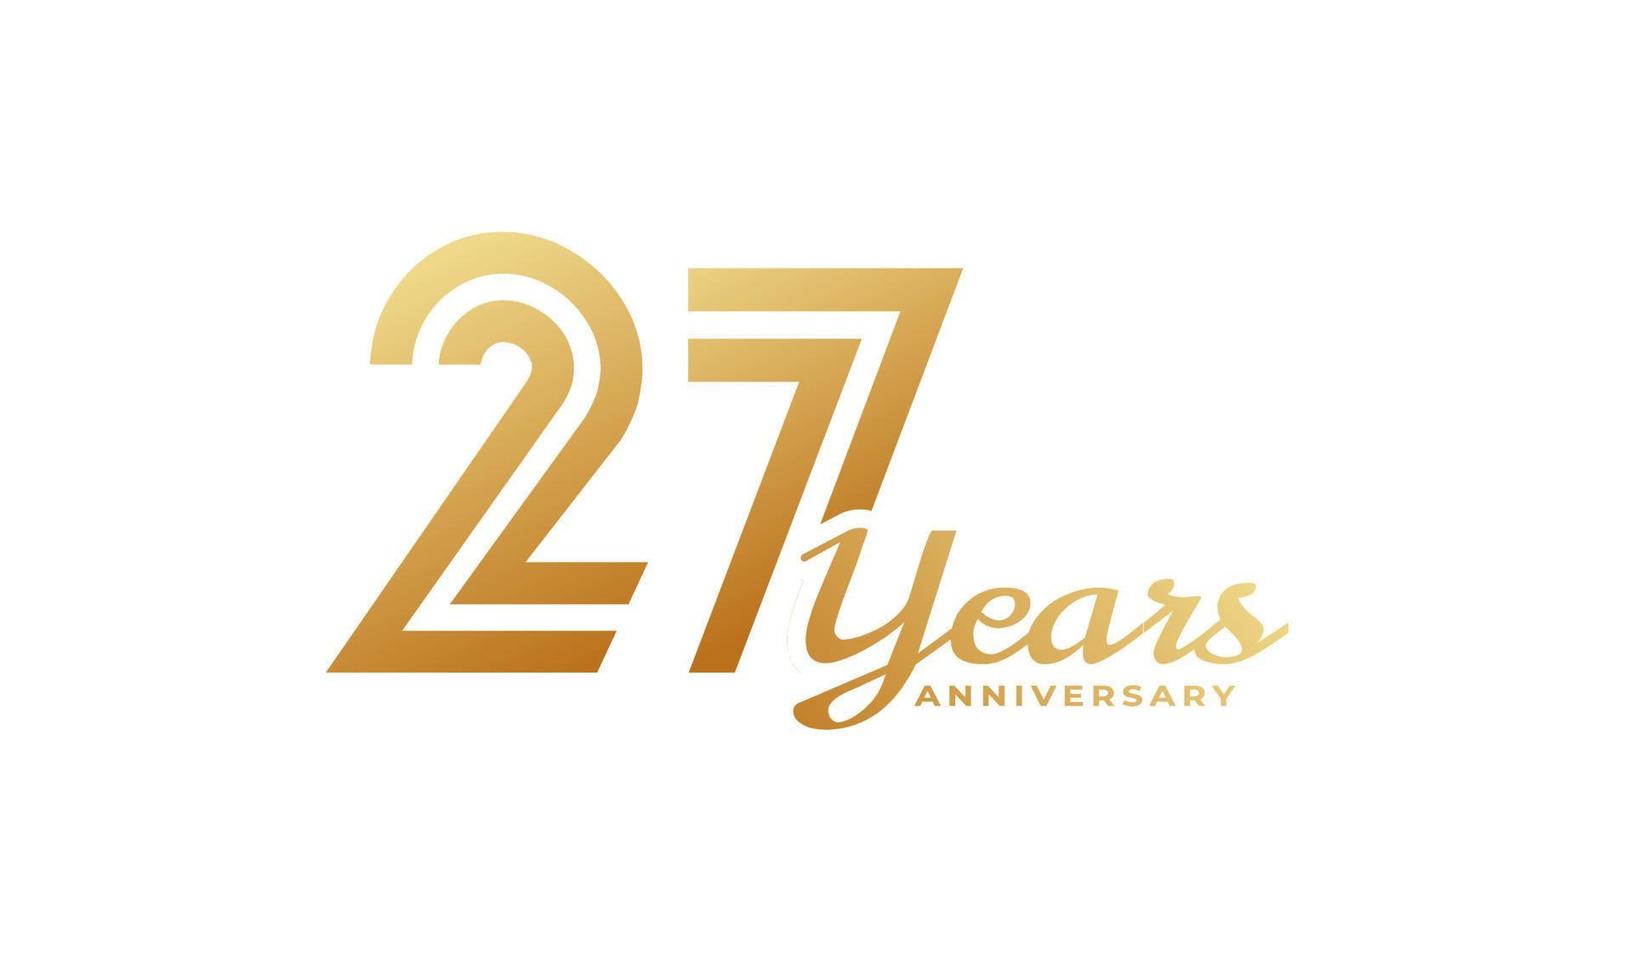 27 Year Anniversary Celebration with Handwriting Golden Color for Celebration Event, Wedding, Greeting card, and Invitation Isolated on White Background vector